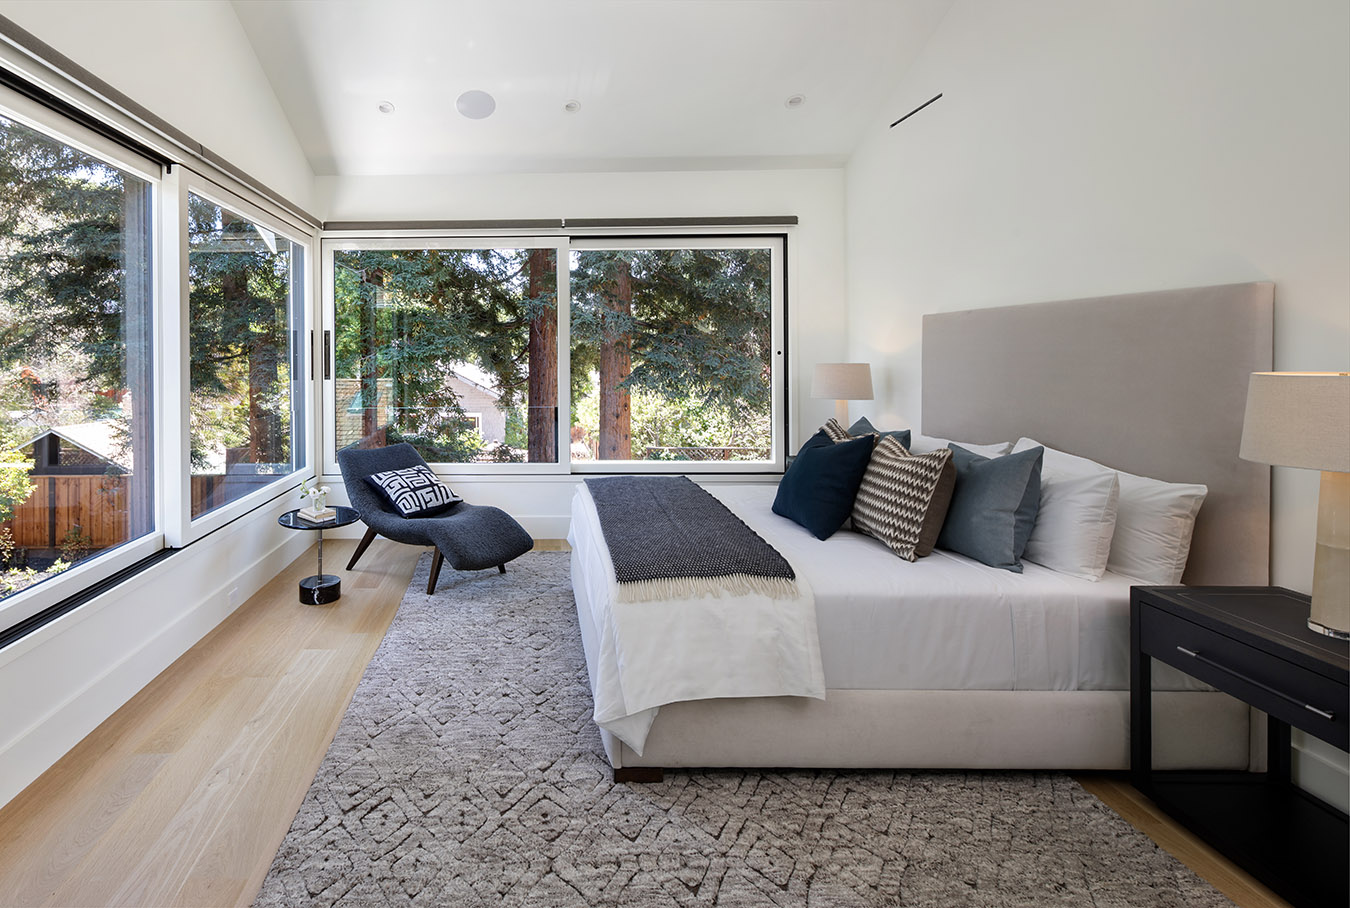 Enjoy the canopy of the majestic redwood trees as you retreat to the primary suite with its vaulted ceilings, oversized picture windows, spa-like bath, and spacious walk-in closet.